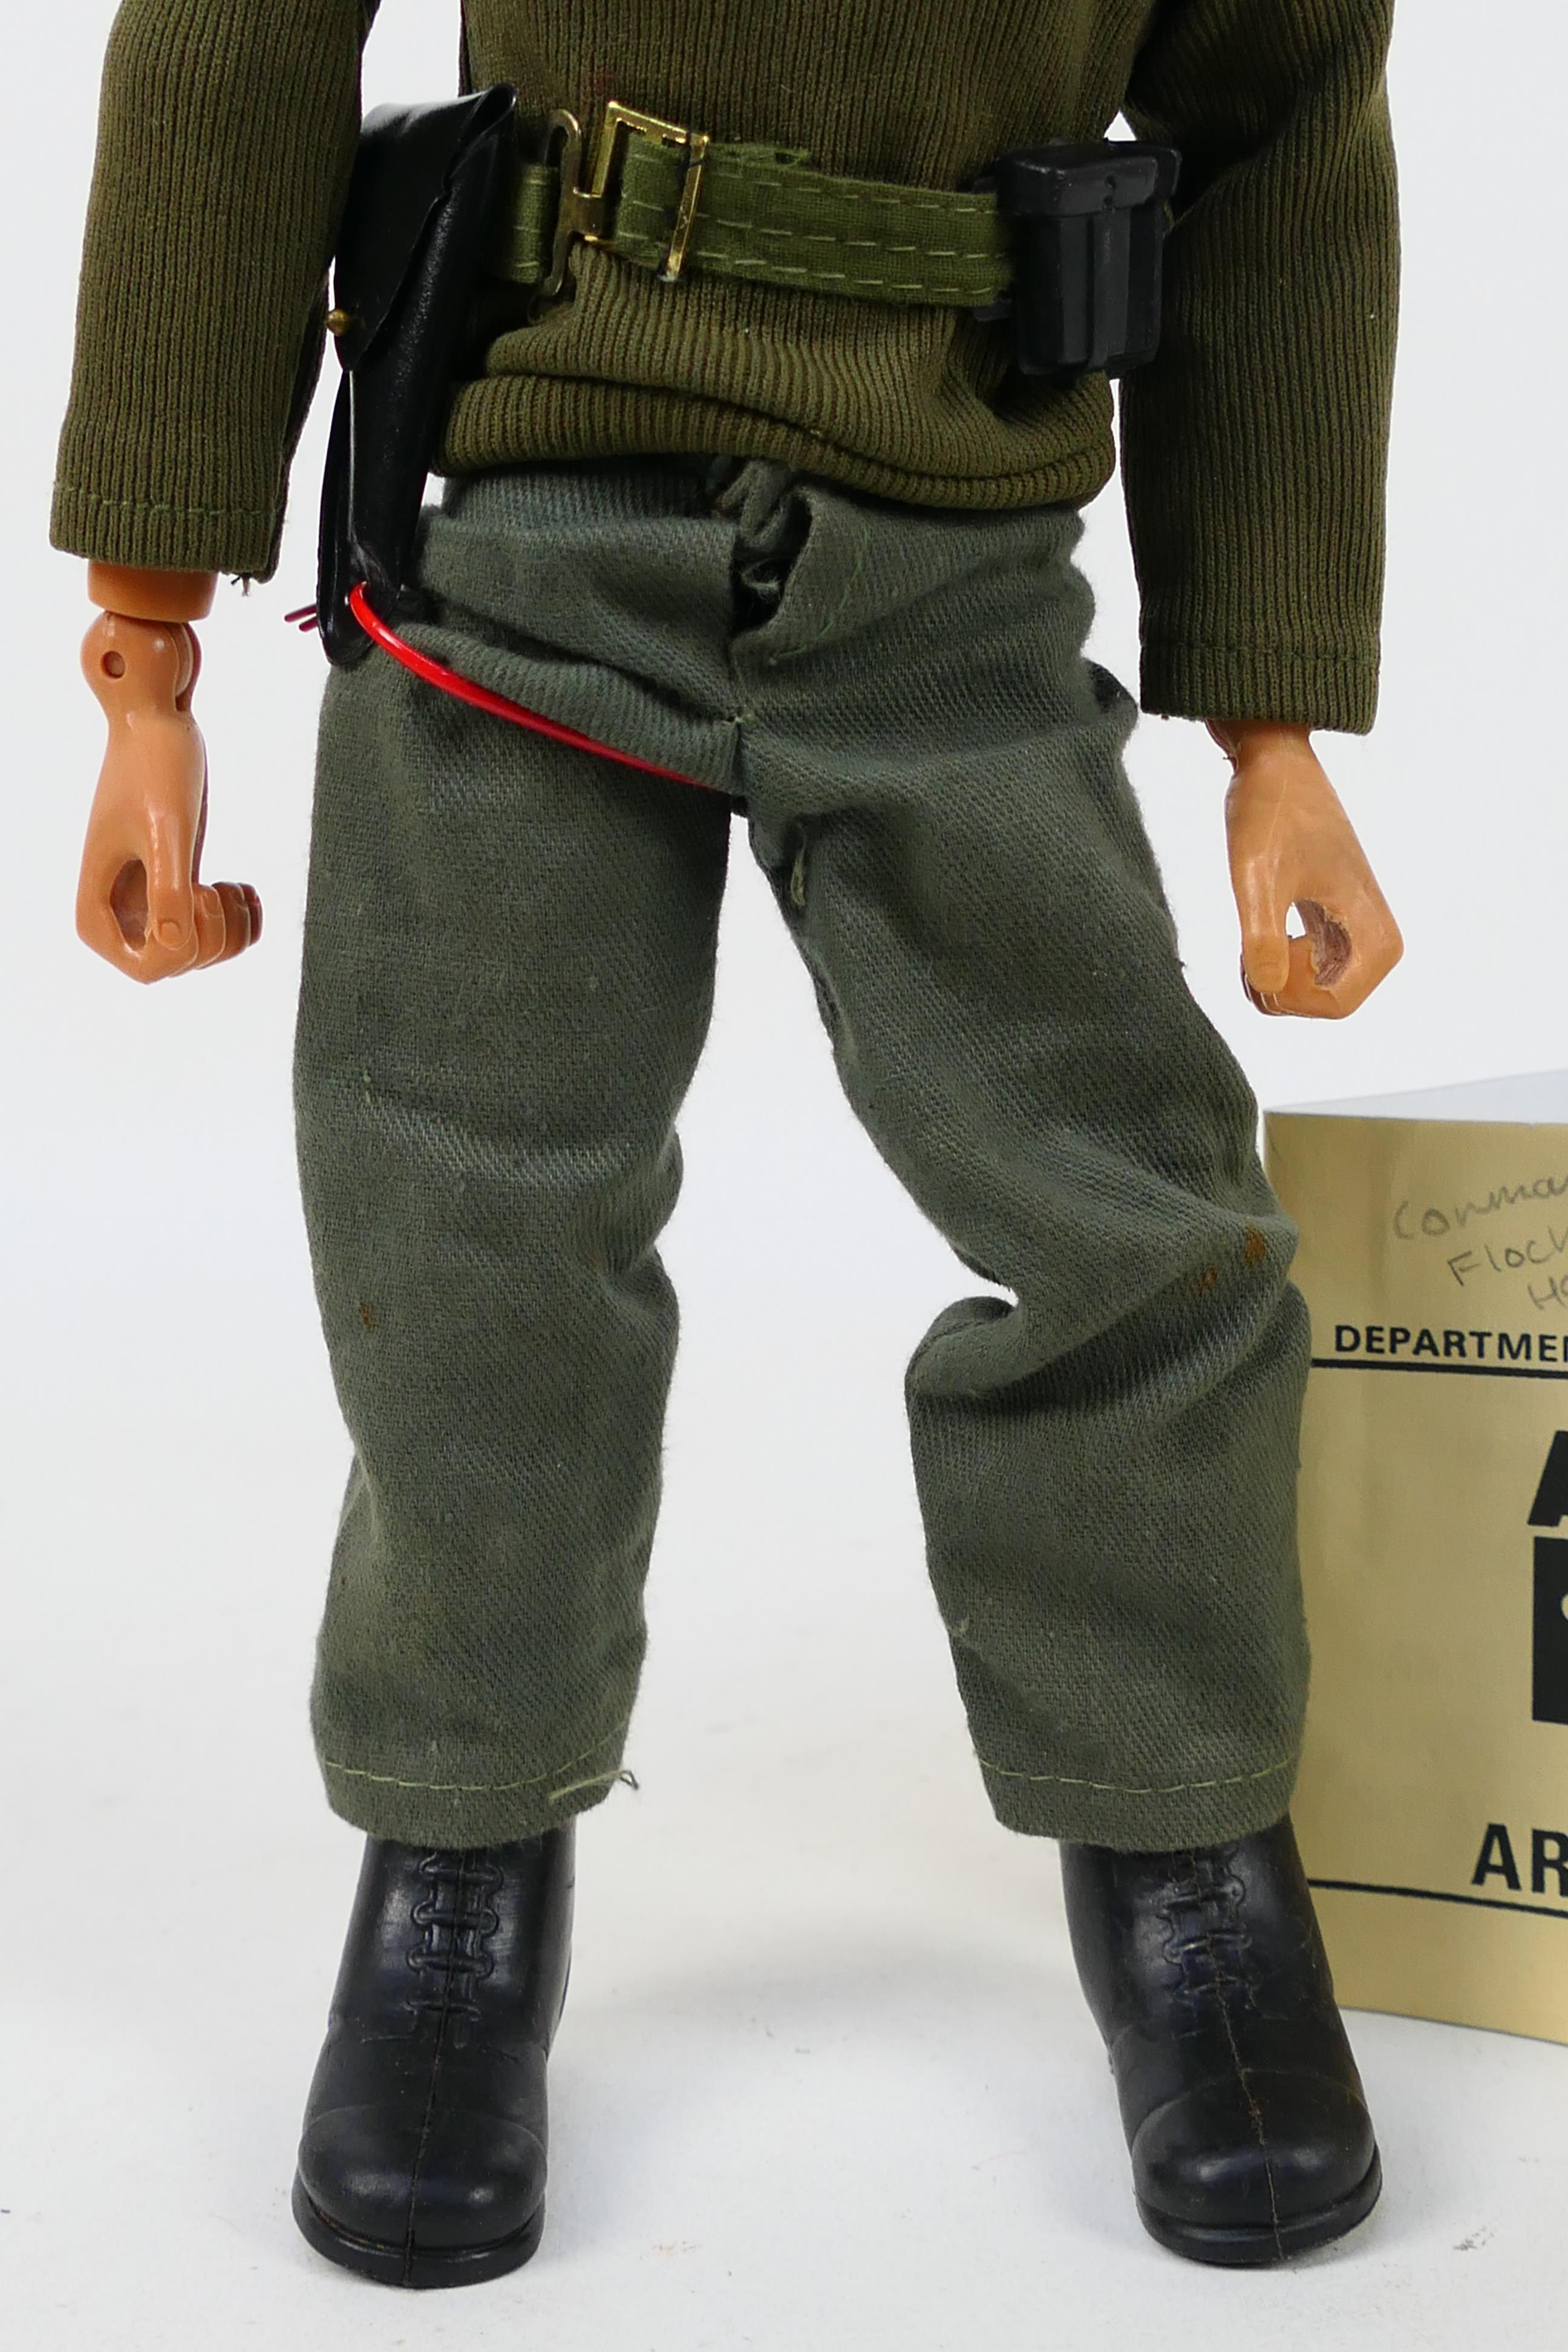 Palitoy - Action Man - An unboxed vintage 'Talking Commander' eagle eye Action Man blonde flock - Image 4 of 7